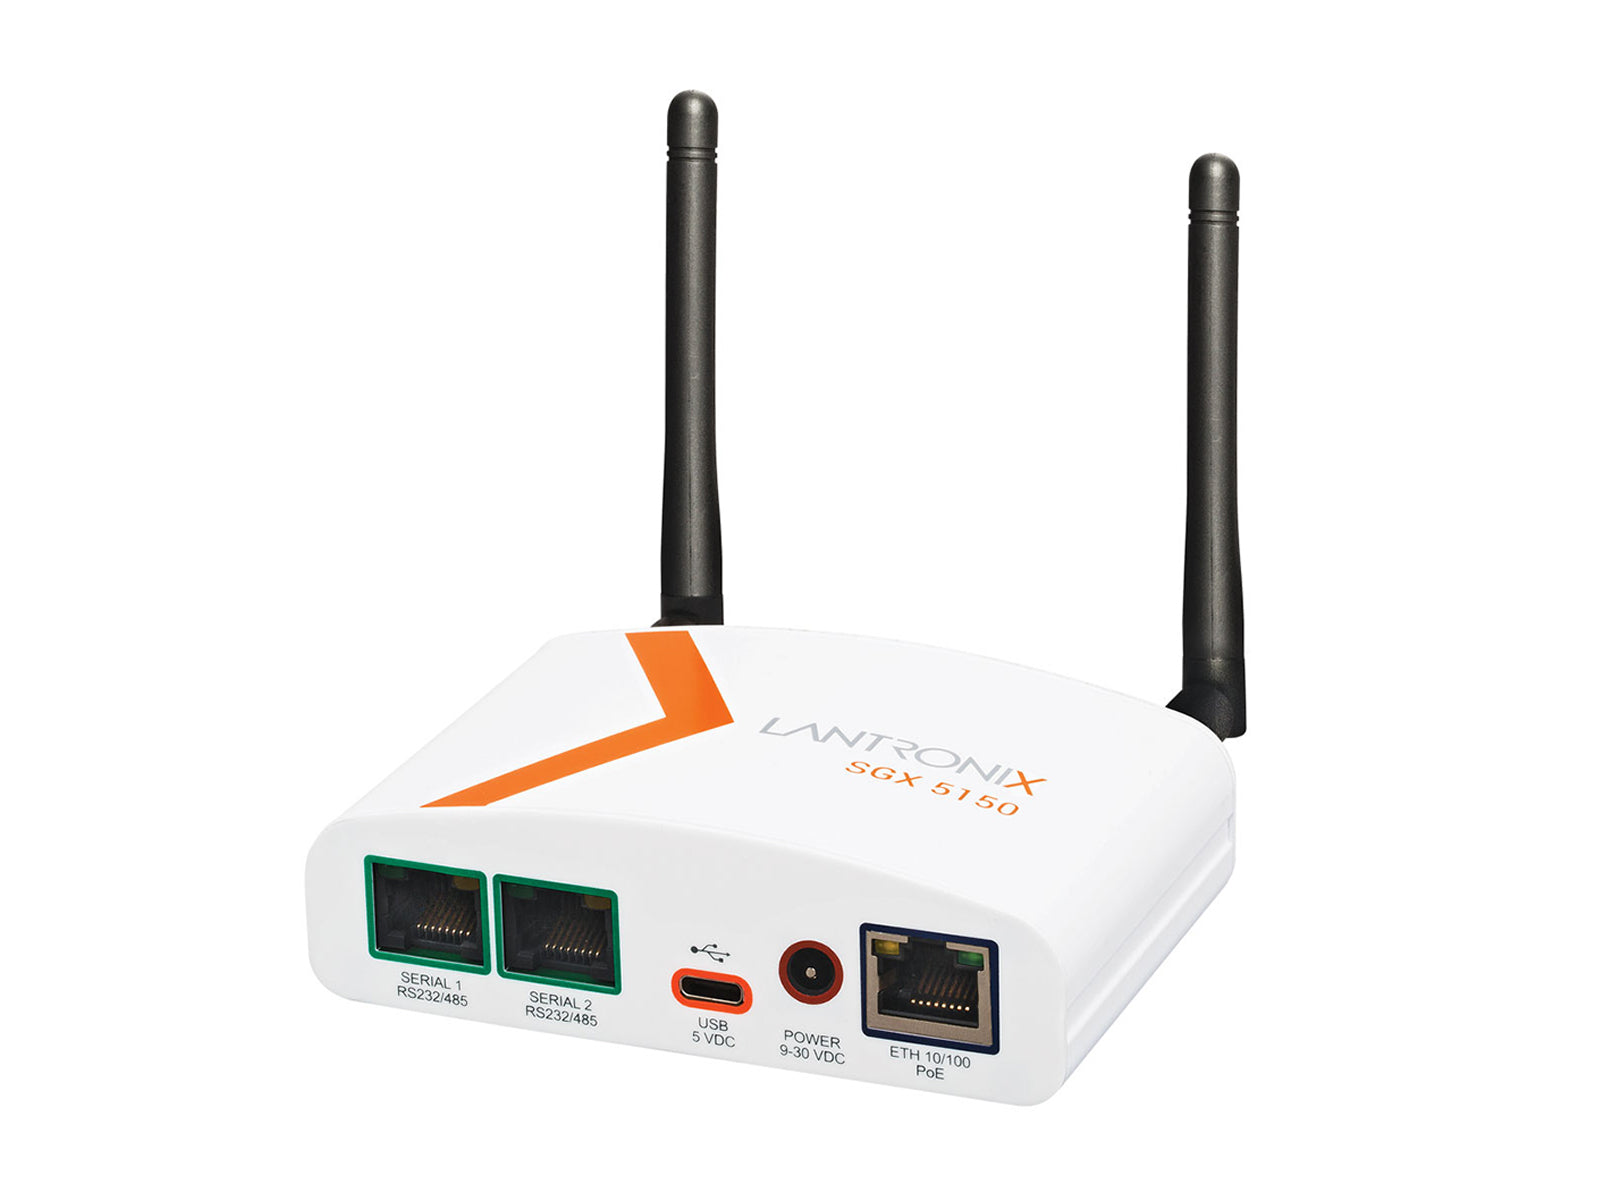 Lantronix SGX 5150 Device Gateway Router Dual Band Wireless and Ethernet (SGX5150000US)